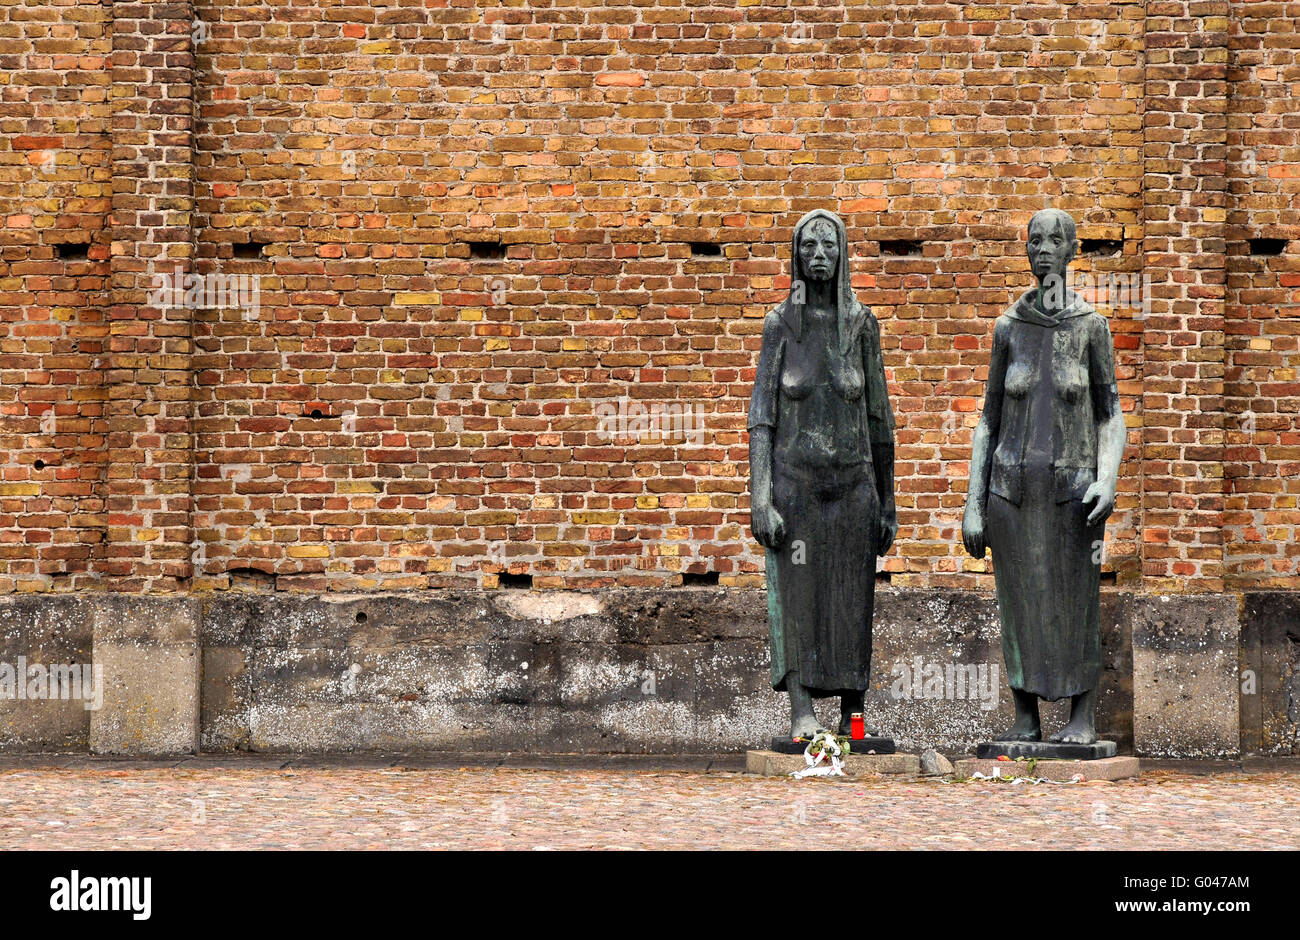 Memorial Two Woman Standing, Wall of Nations, Concentration camp, Ravensbruck, near Furstenberg, Brandenburg, Germany / Ravensbrück Concentration camp, Konzentrationslager Ravensbrück, KZ, Fürstenberg, Denkmal Zwei Stehende, Mauer der Nationen, by Will La Stock Photo